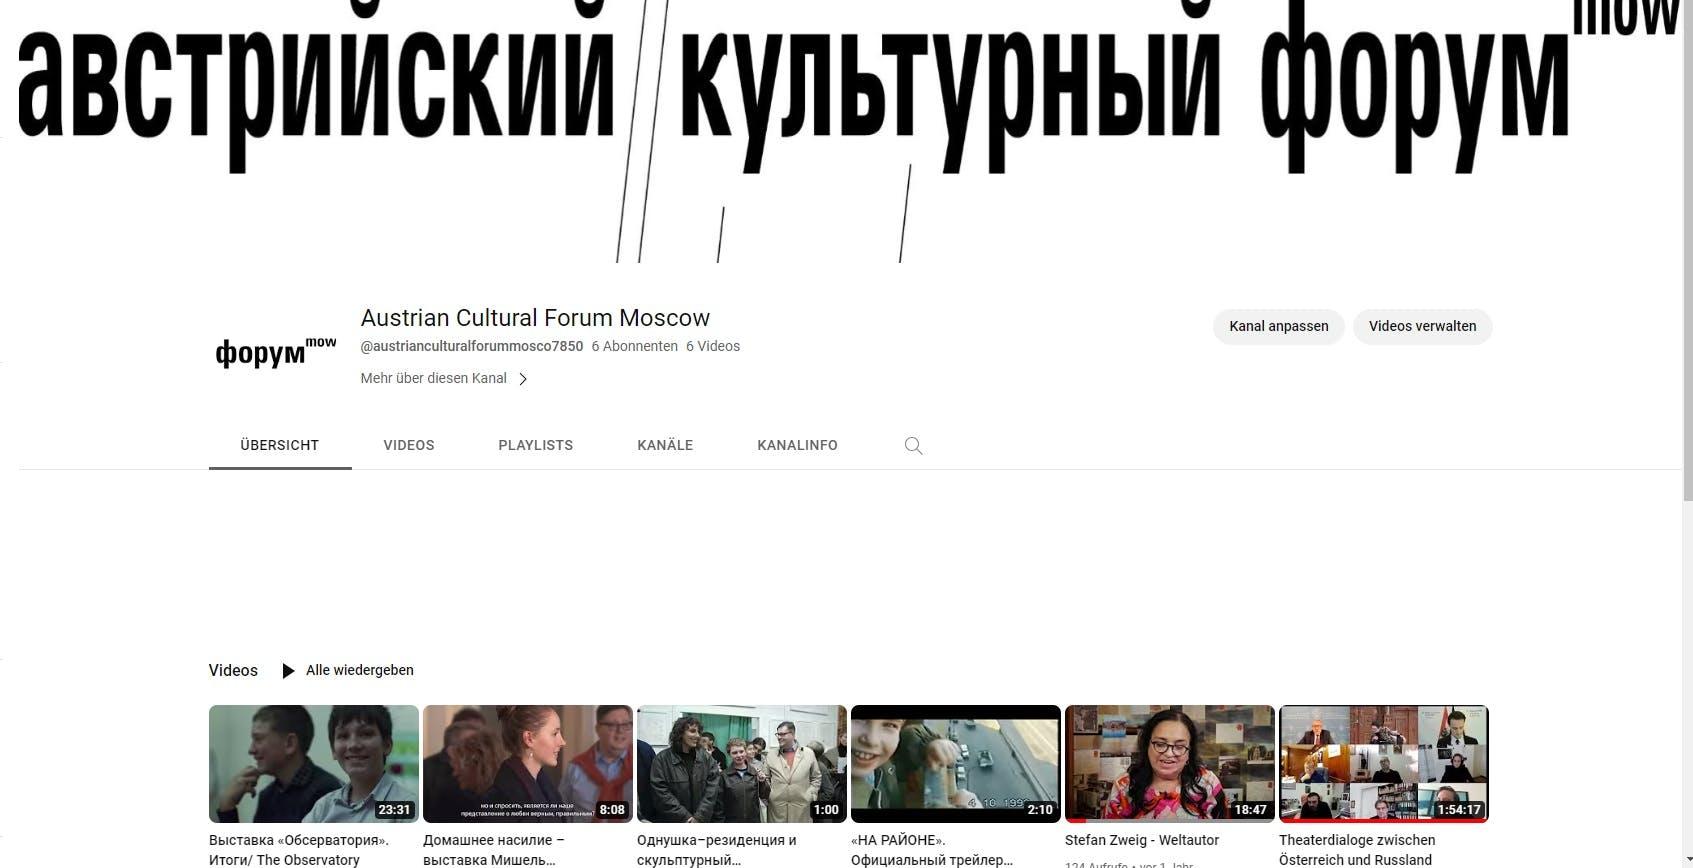 Video about past projects of the Austrian Cultural Forum